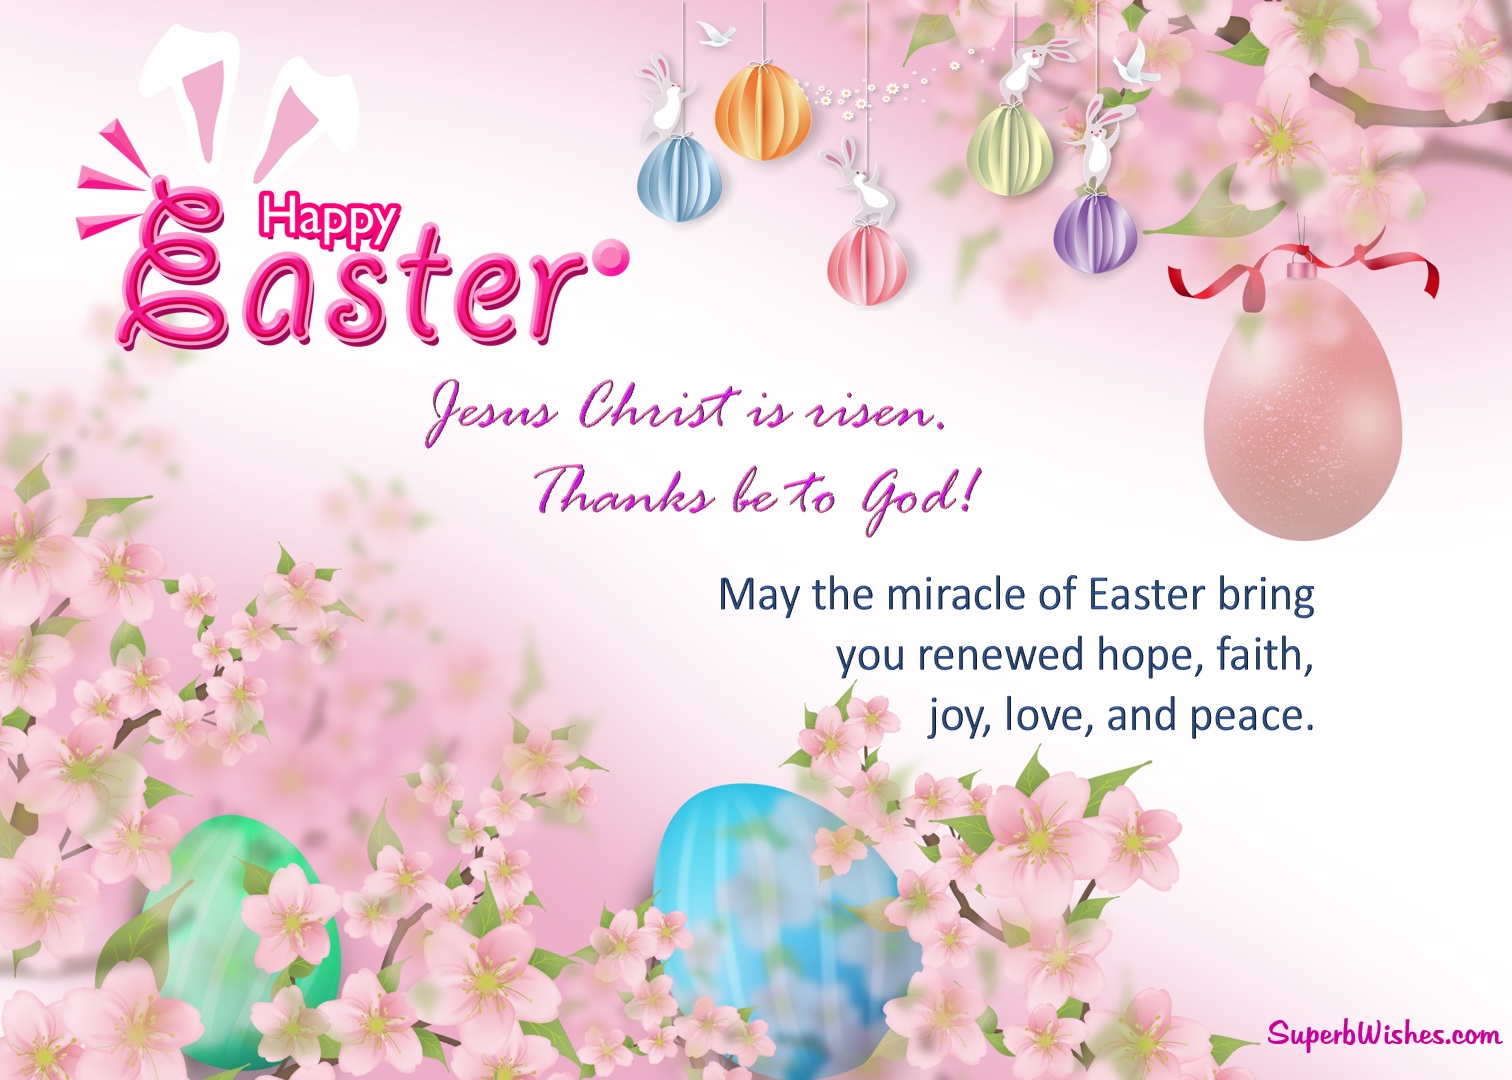 He Is Risen Easter Images by SuperbWishes